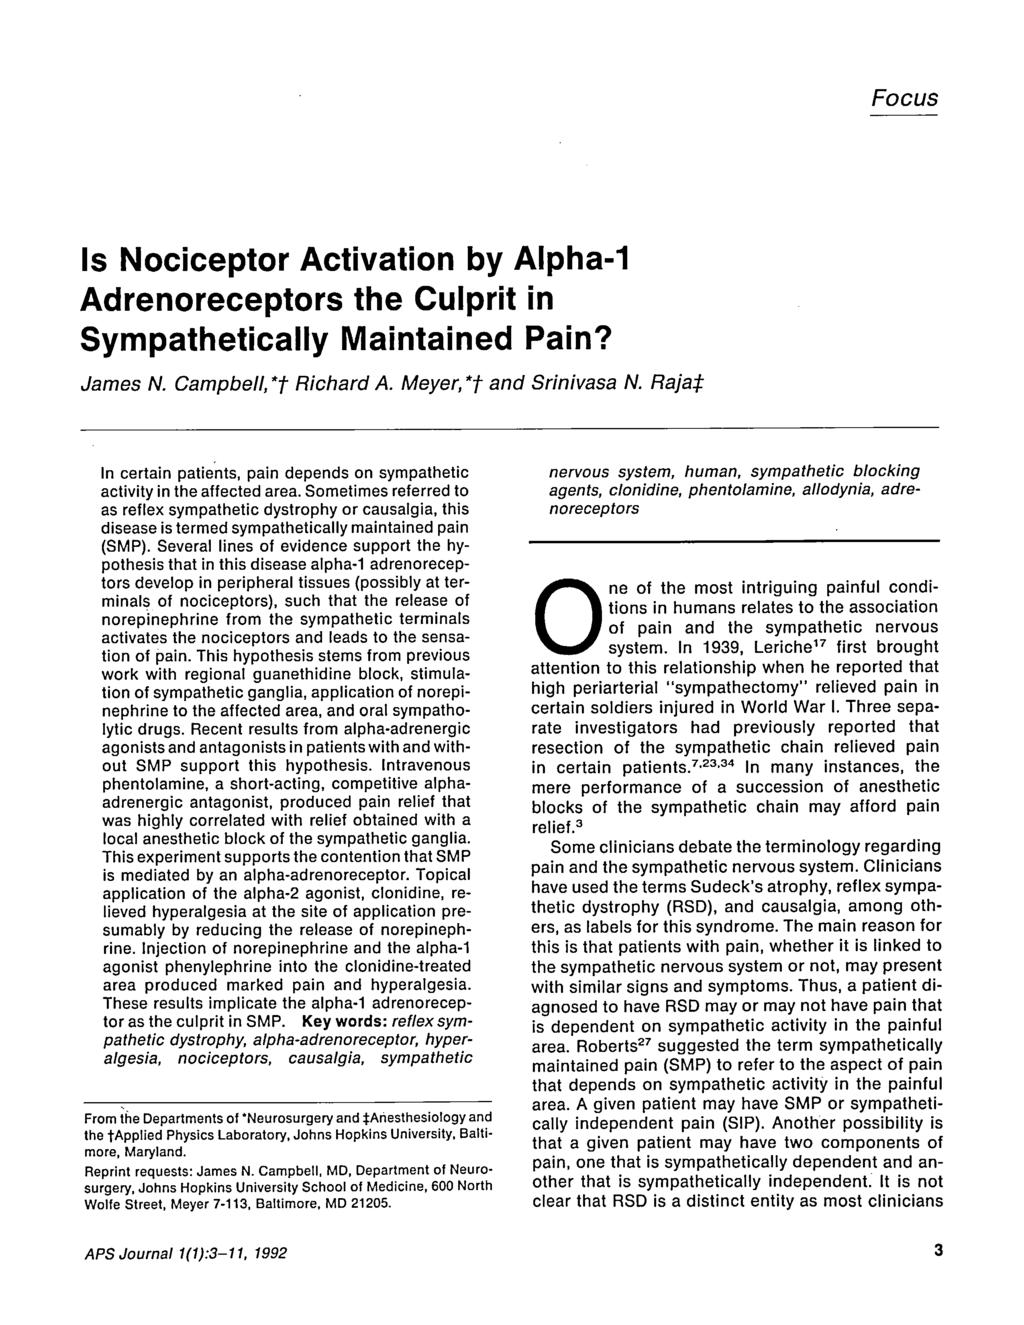 Focus Is Nociceptor Activation by Alpha-1 Adrenoreceptors the Culprit in Sympathetically Maintained Pain? James N. Campbell, *t Richard A. Meyer, *t and Srinivasa N.